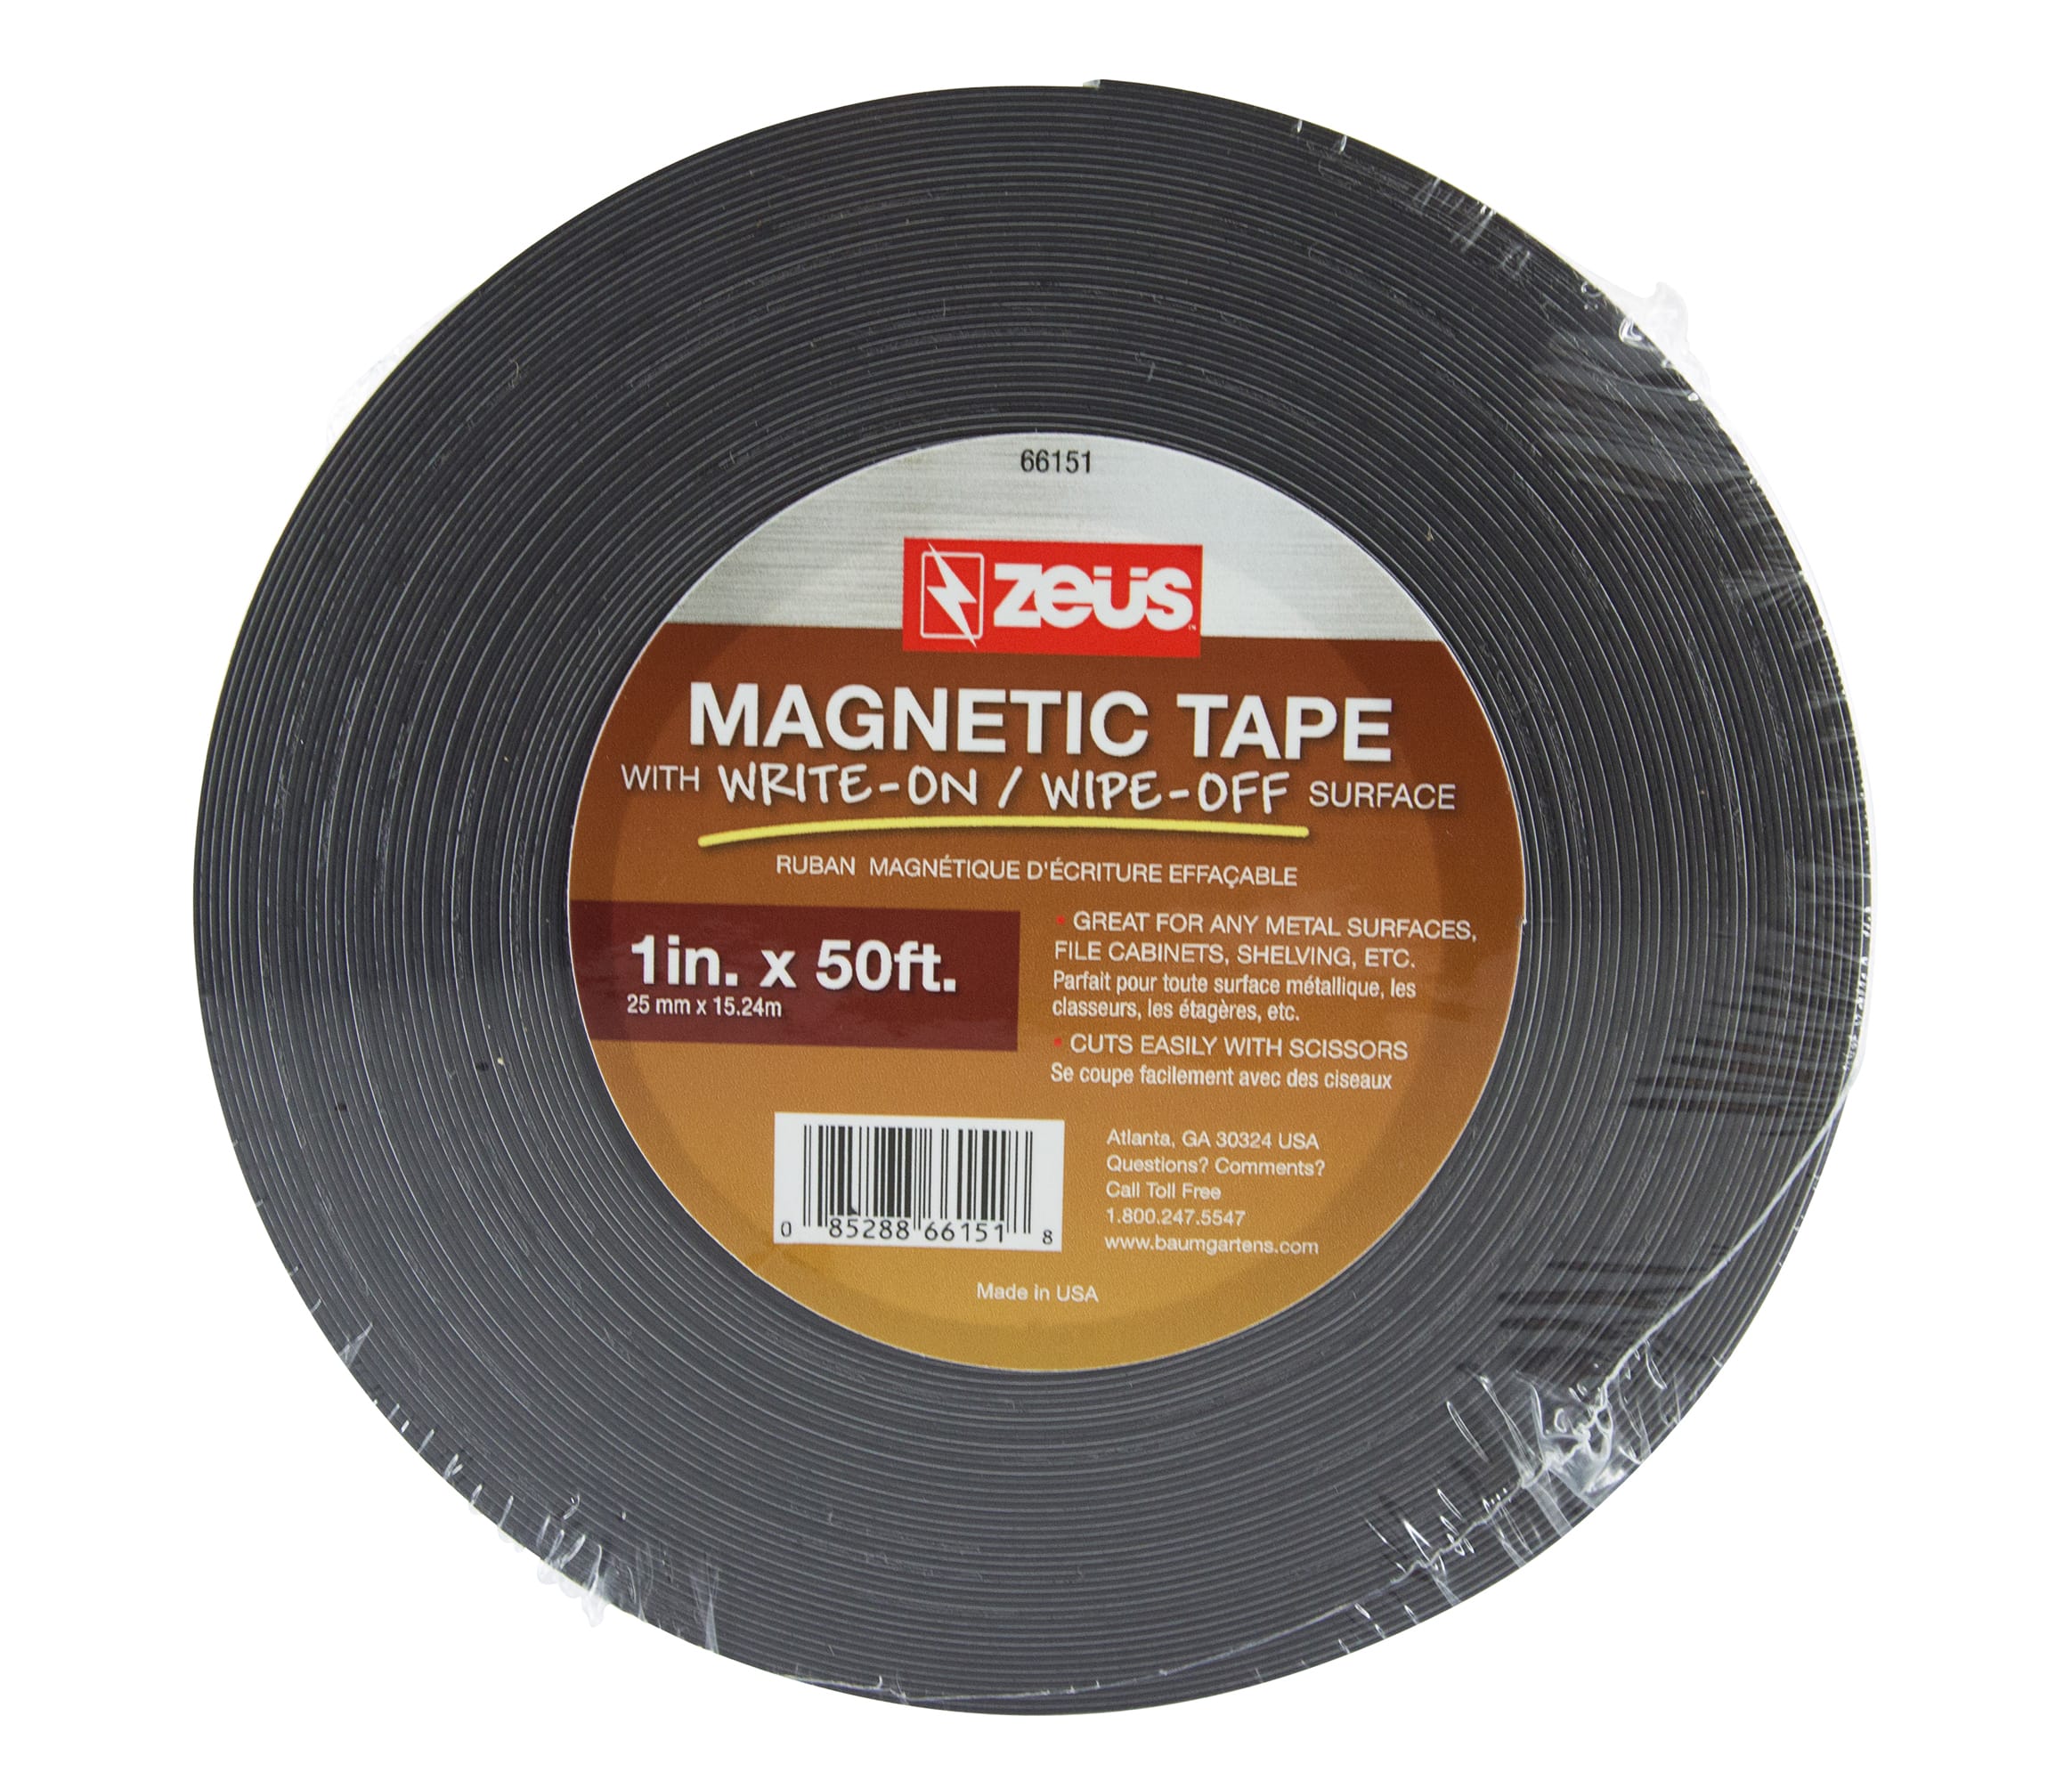 Zeus Magnetic Tape - 10 ft Length x 0.50 Width - Magnet - Adhesive Backing  - For Sign, Photo - 1 / Roll - Black - Bluebird Office Supplies